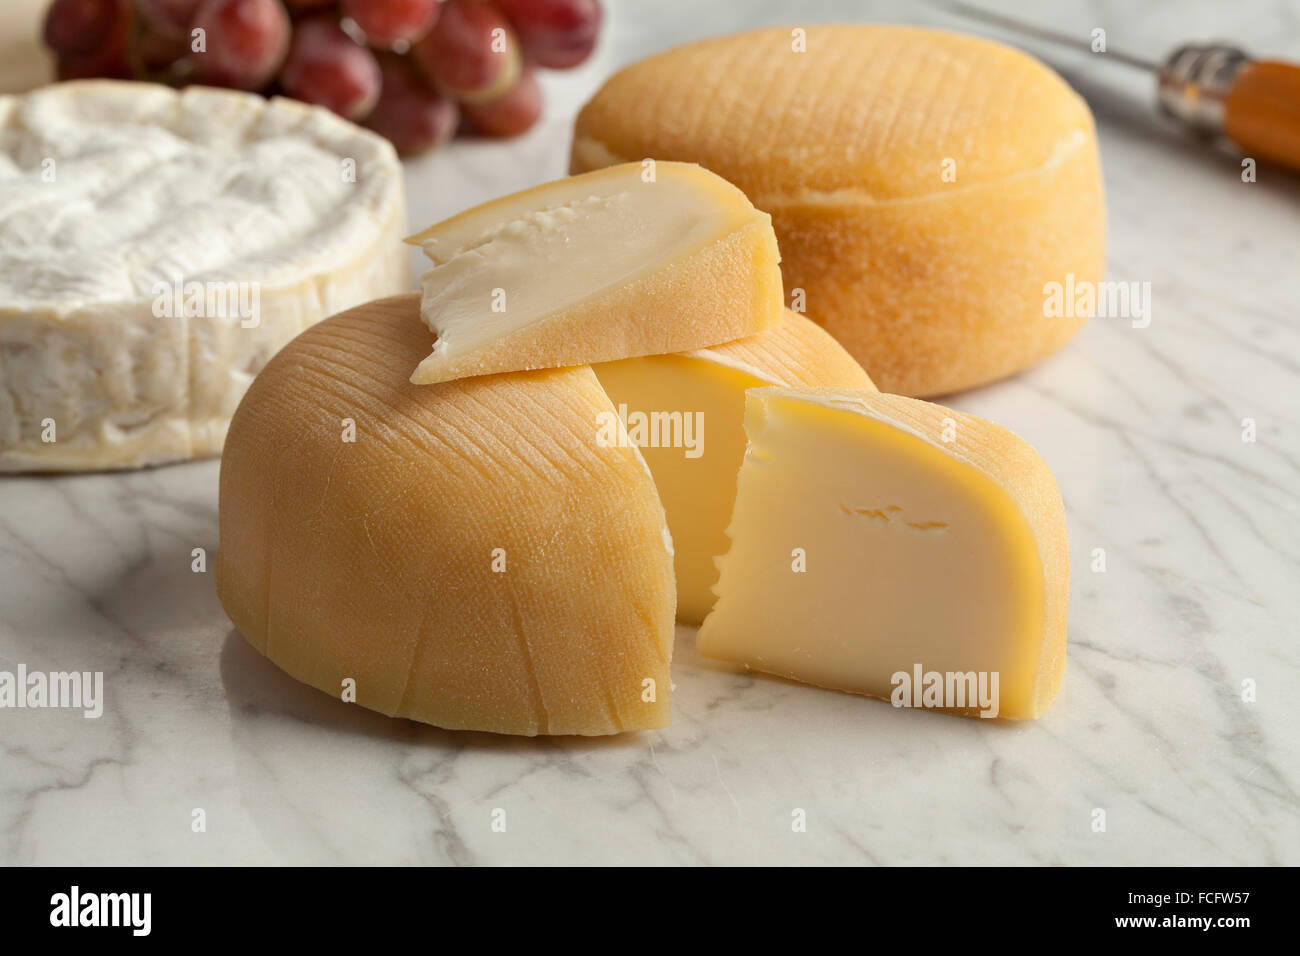 French cheese platter with camembert, chaussee aux moines and grapes as dessert Stock Photo